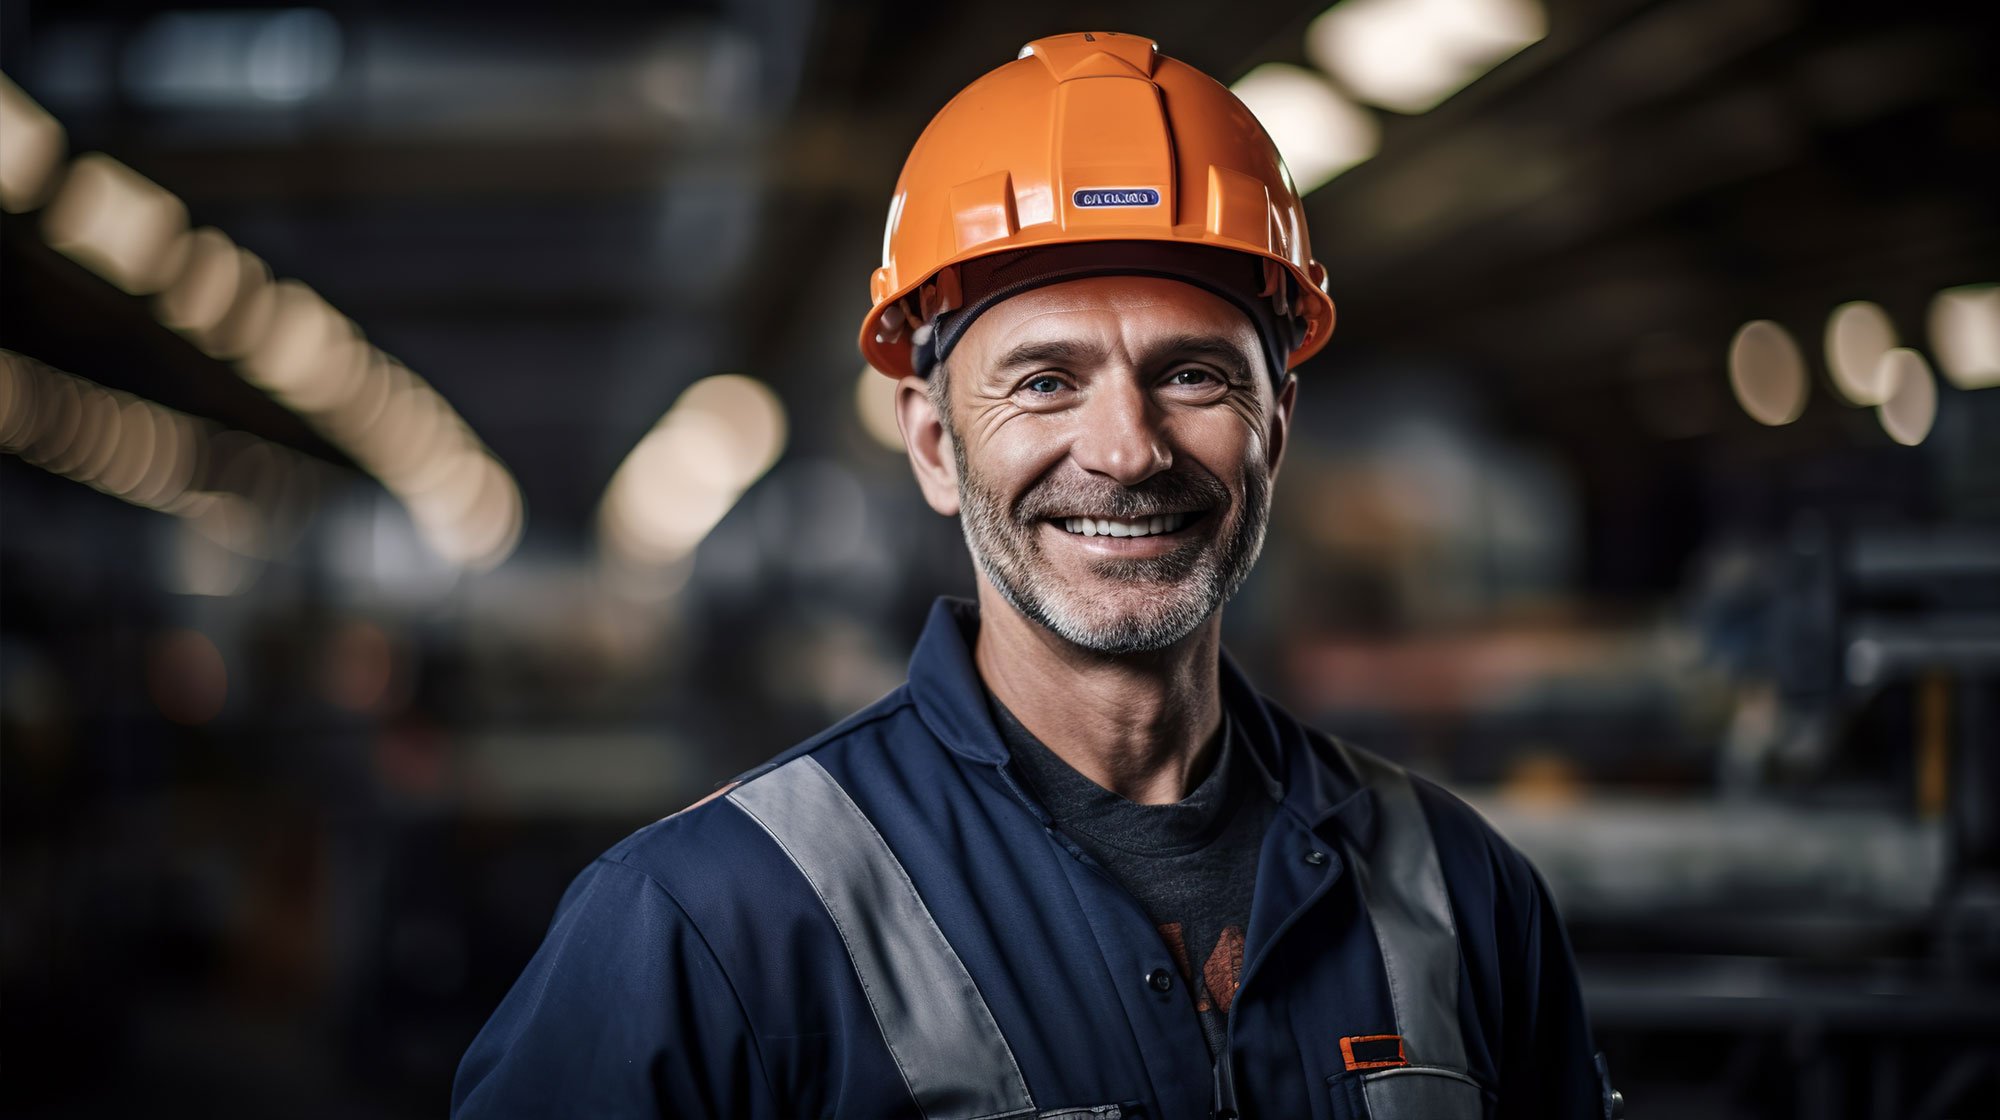 Male worker smiling widely